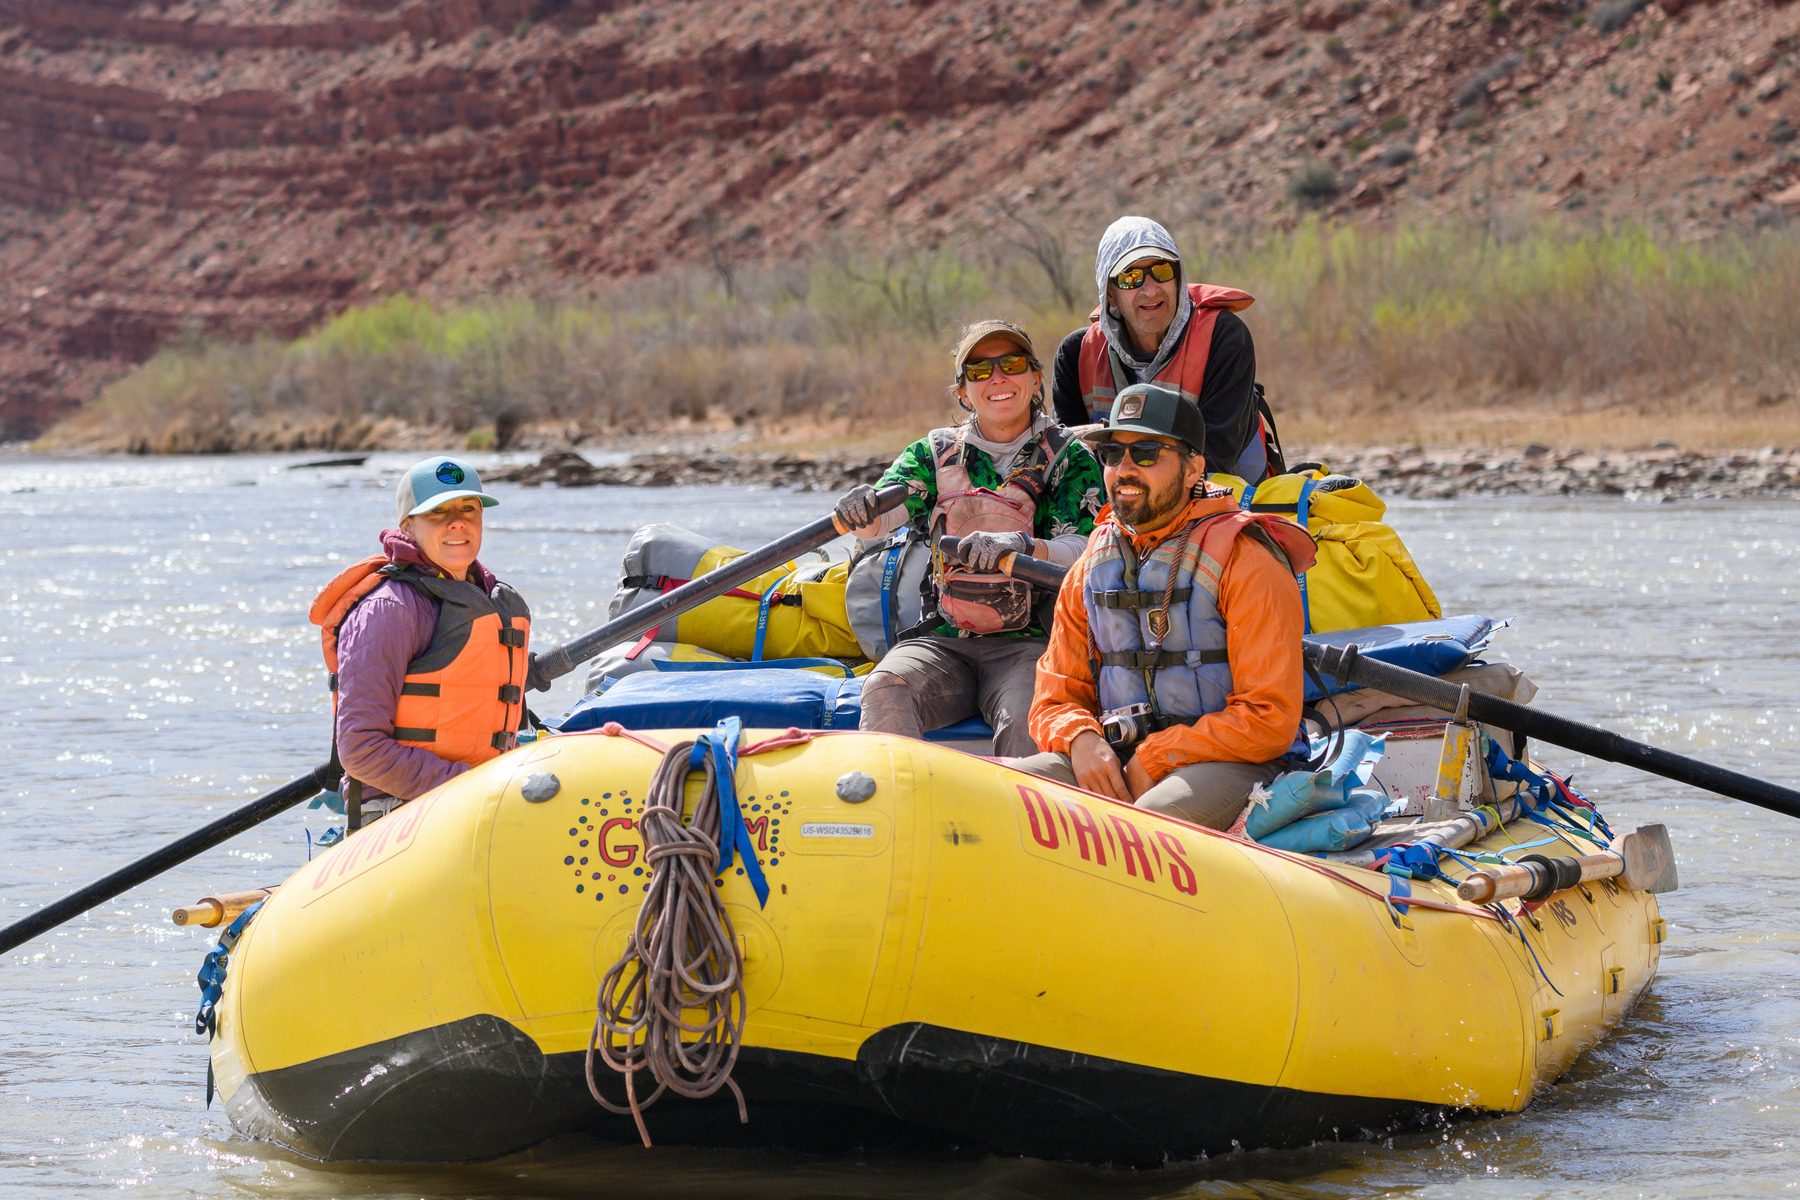 Four adults smile on a yellow raft as they float down the San Juan River on an OARS trip.